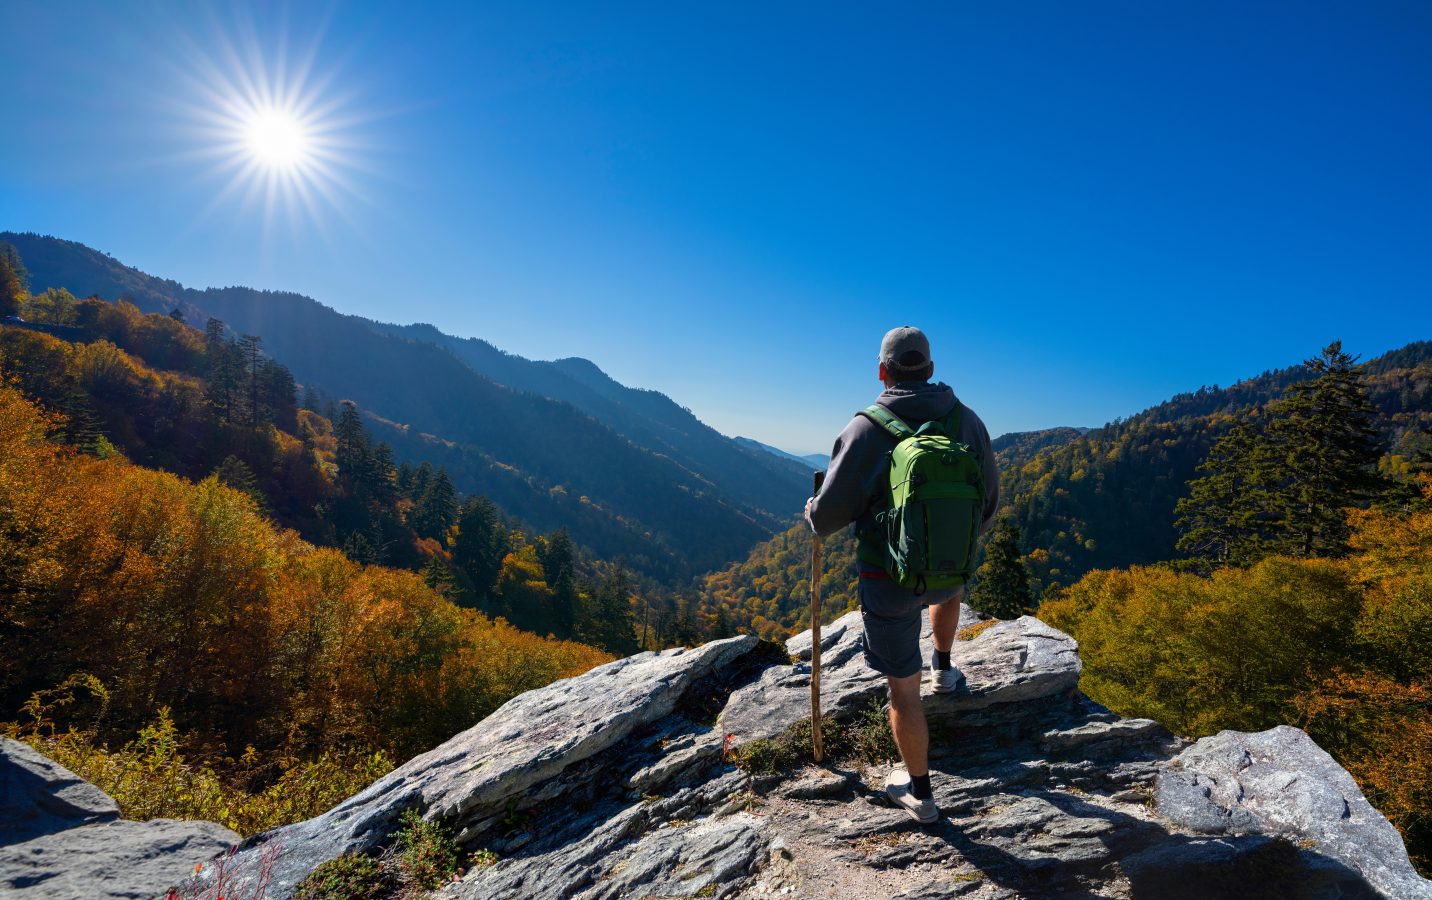 Hiker stands atop a mountain, overlooking the valley of a clear sunny autumn day - taking in the peace and solitude.